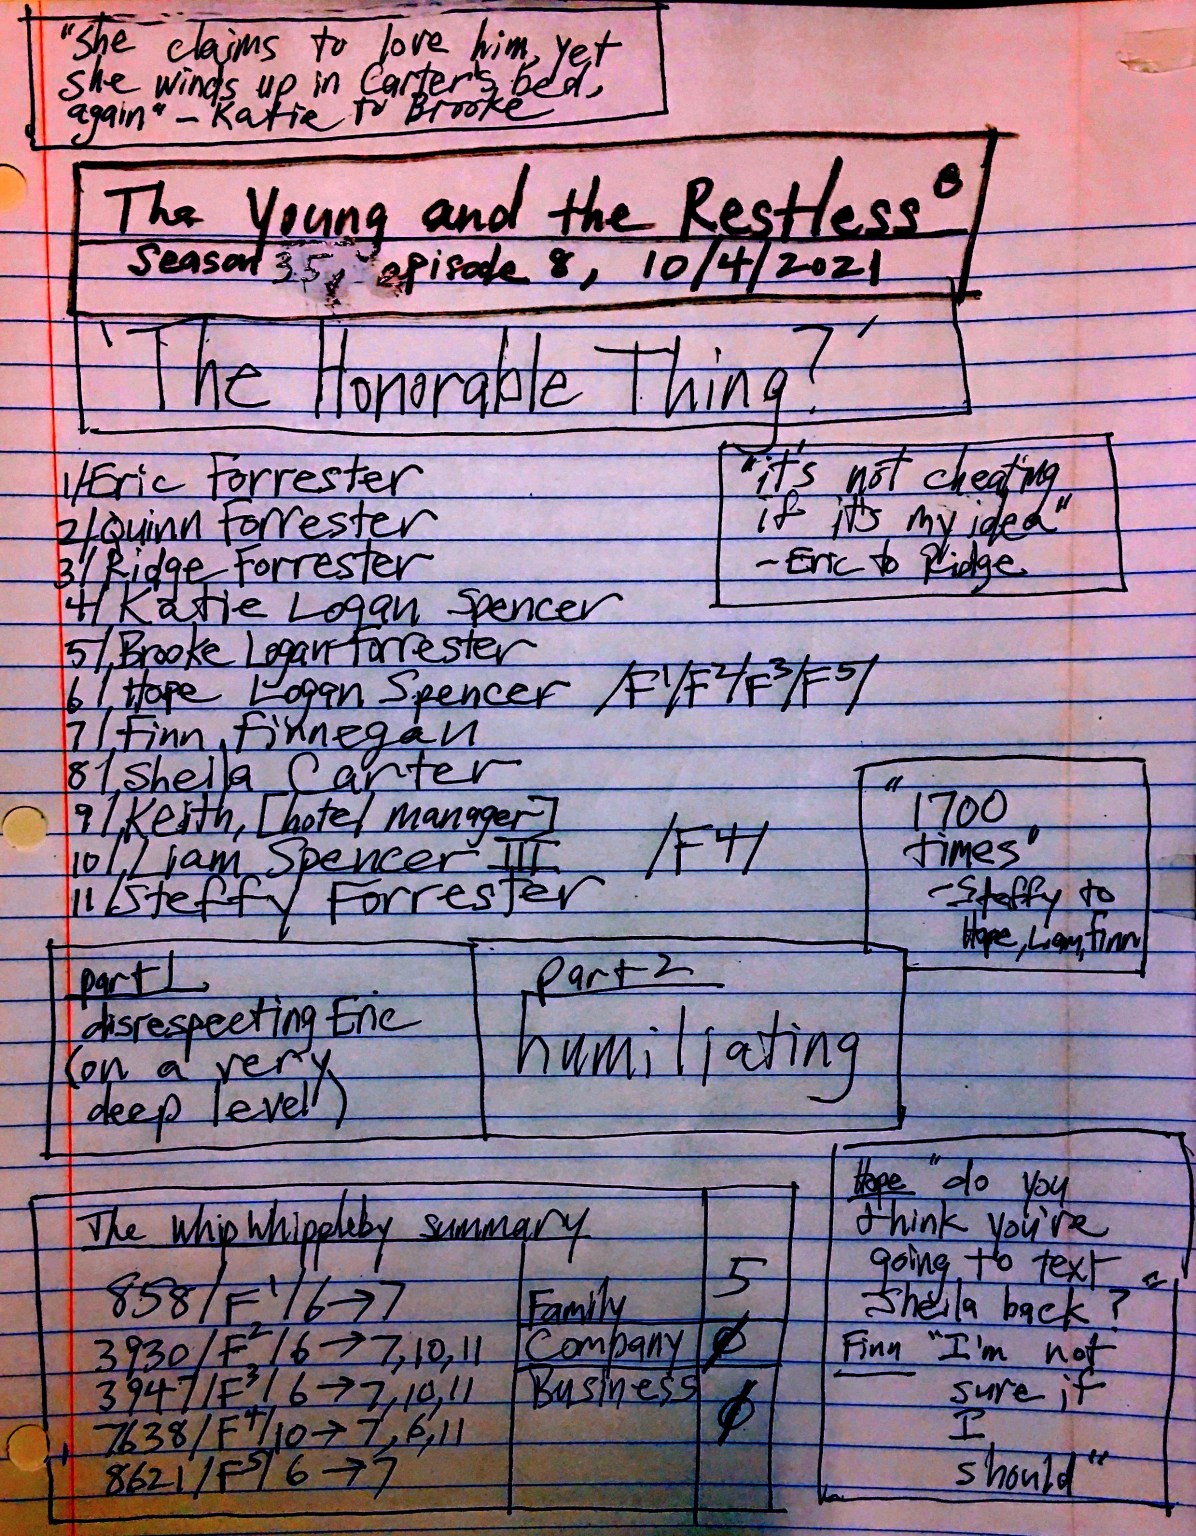 'The Honorable Thing?' - #bb, notes, 10/4/2021